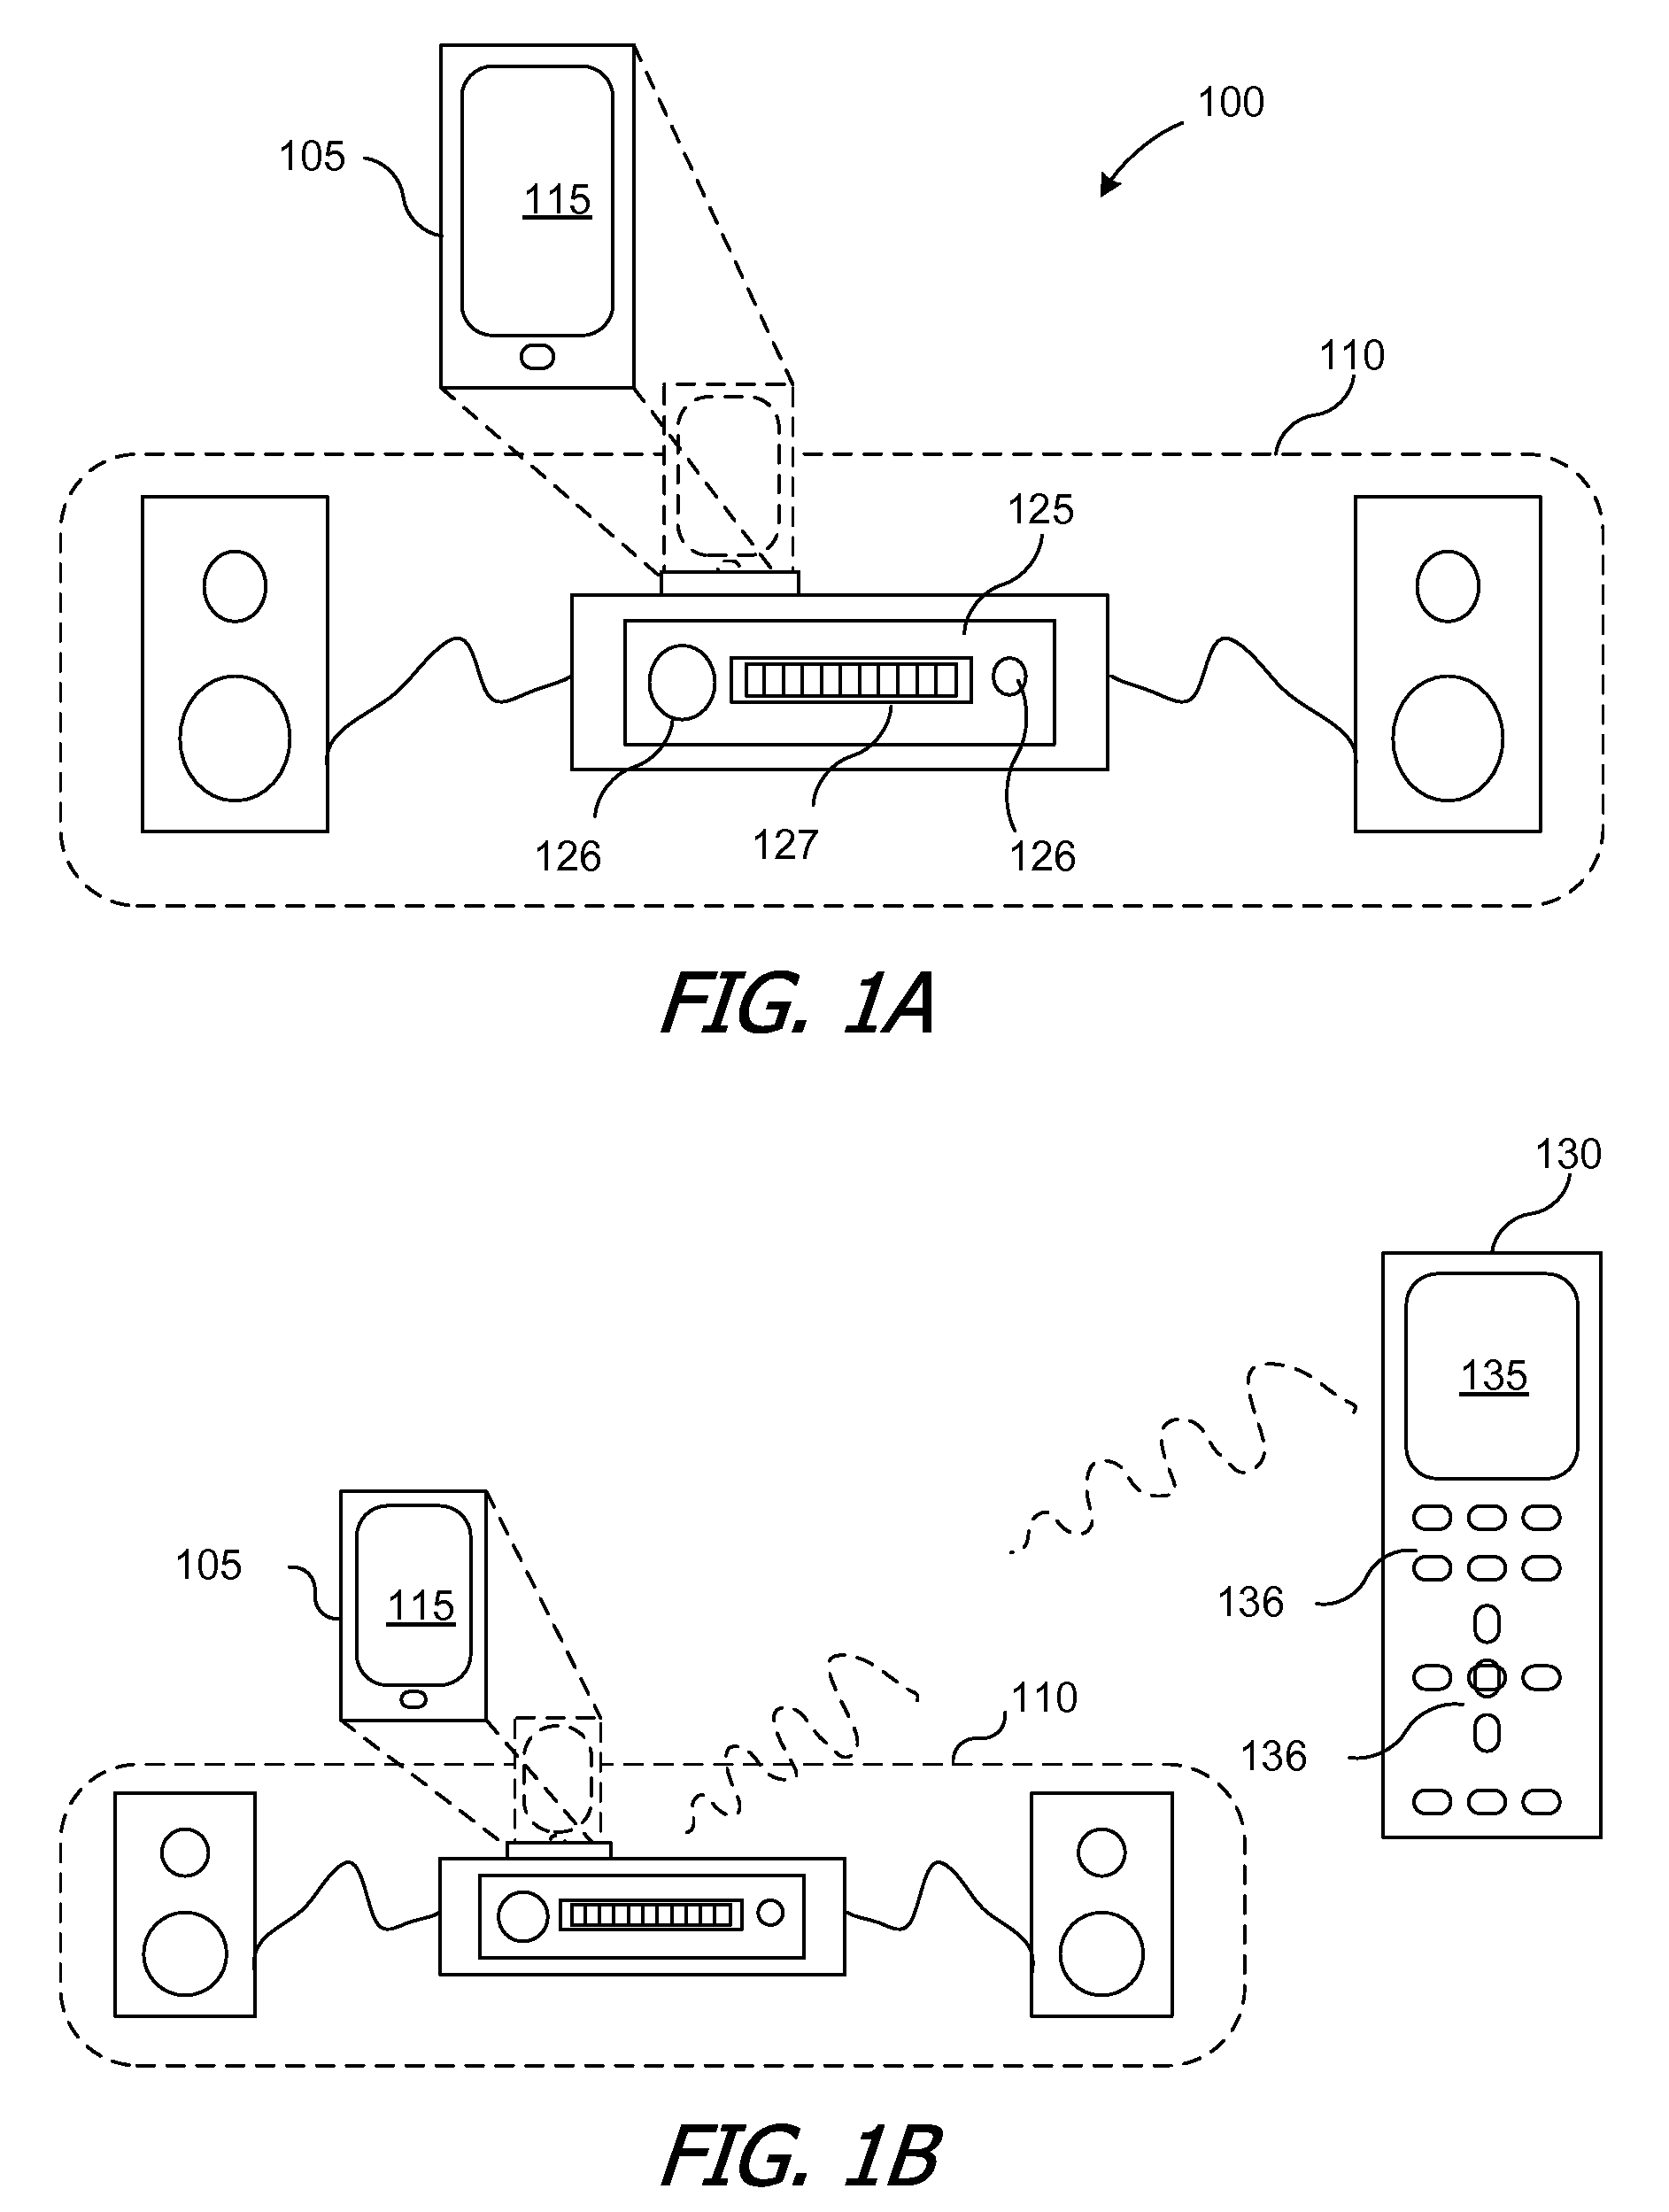 Protocol for remote user interface for portable media device